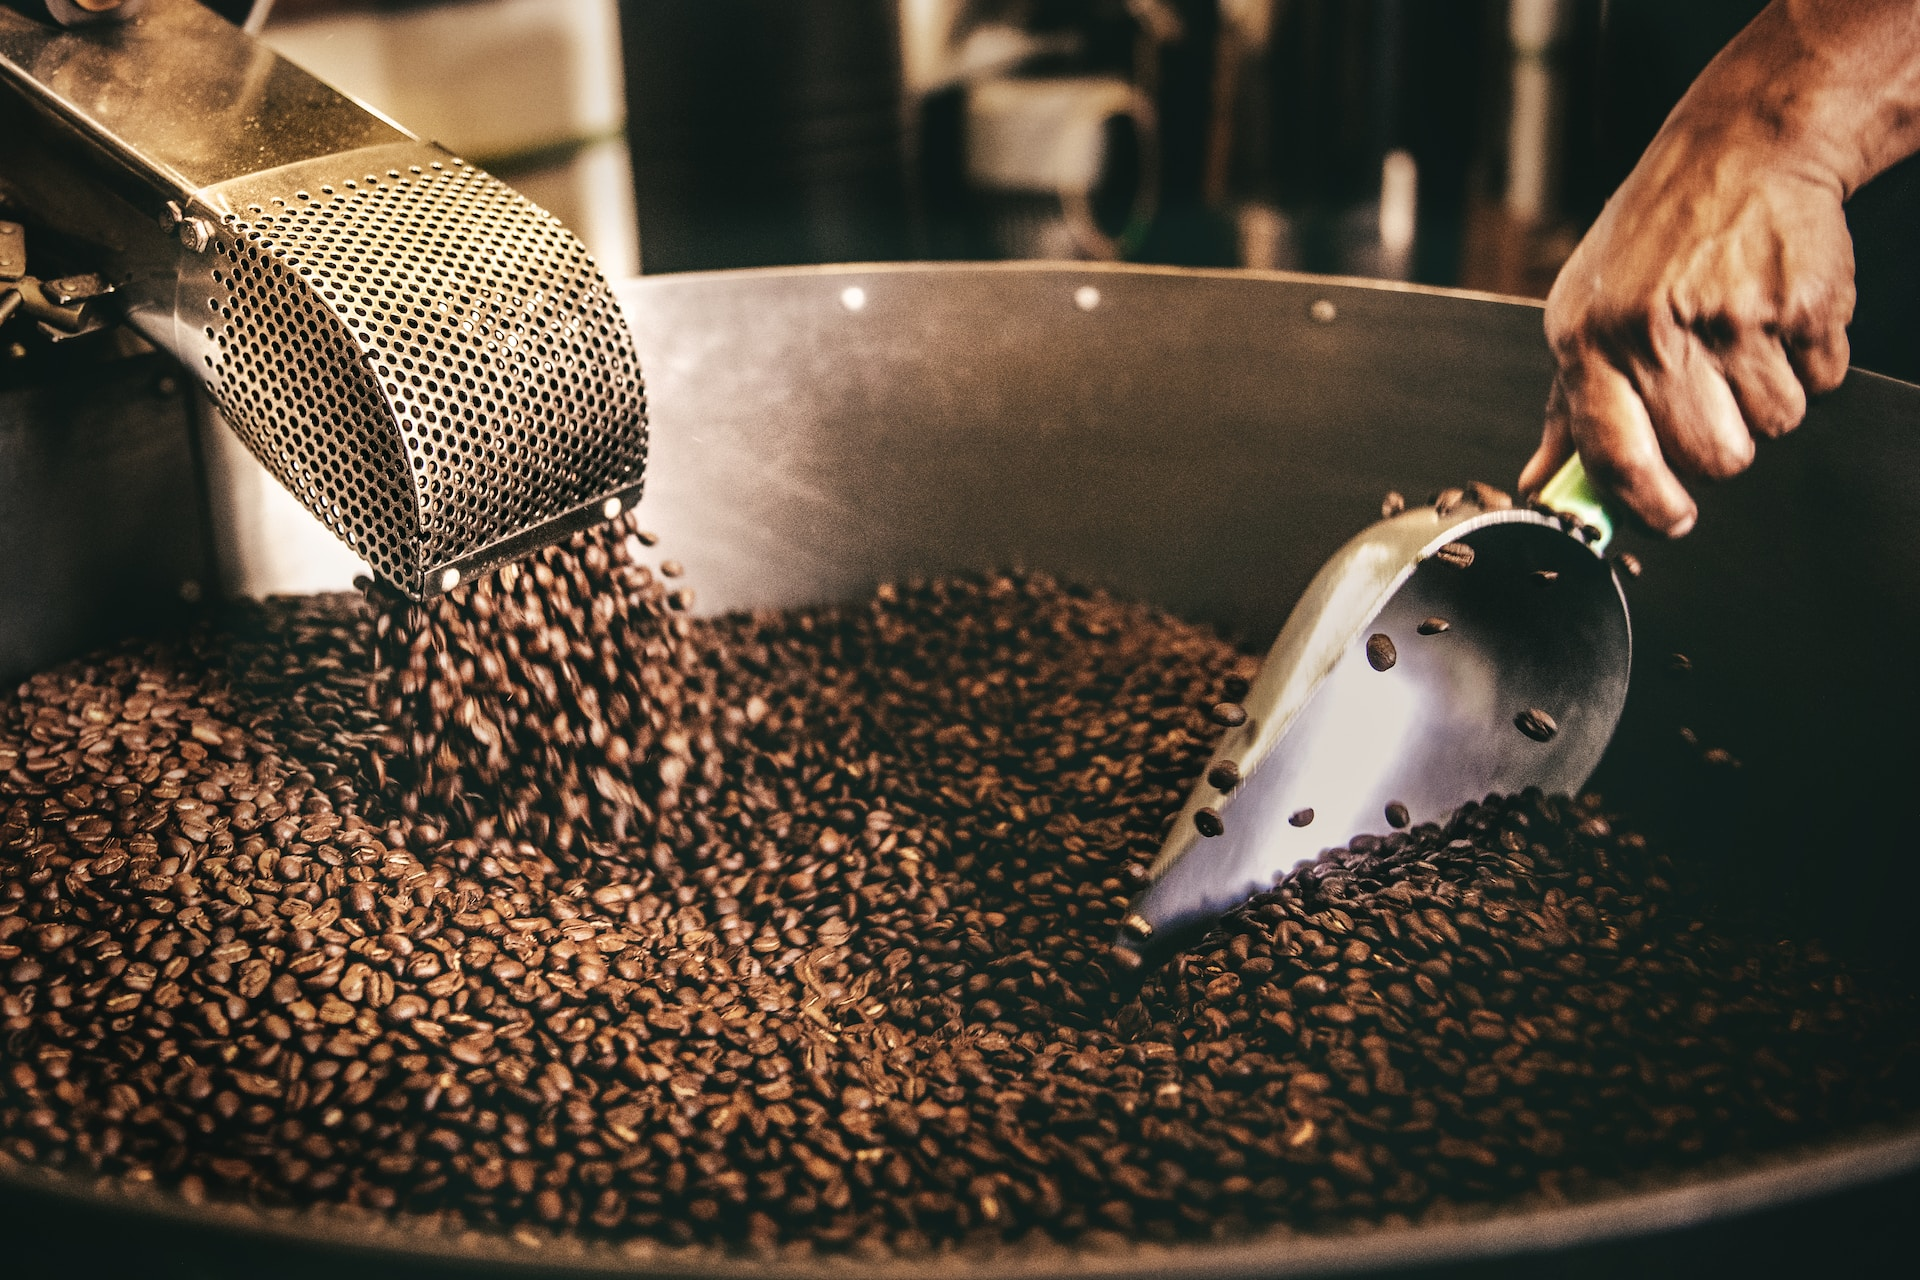 A vat of coffee beans about to be roasted by a supplier